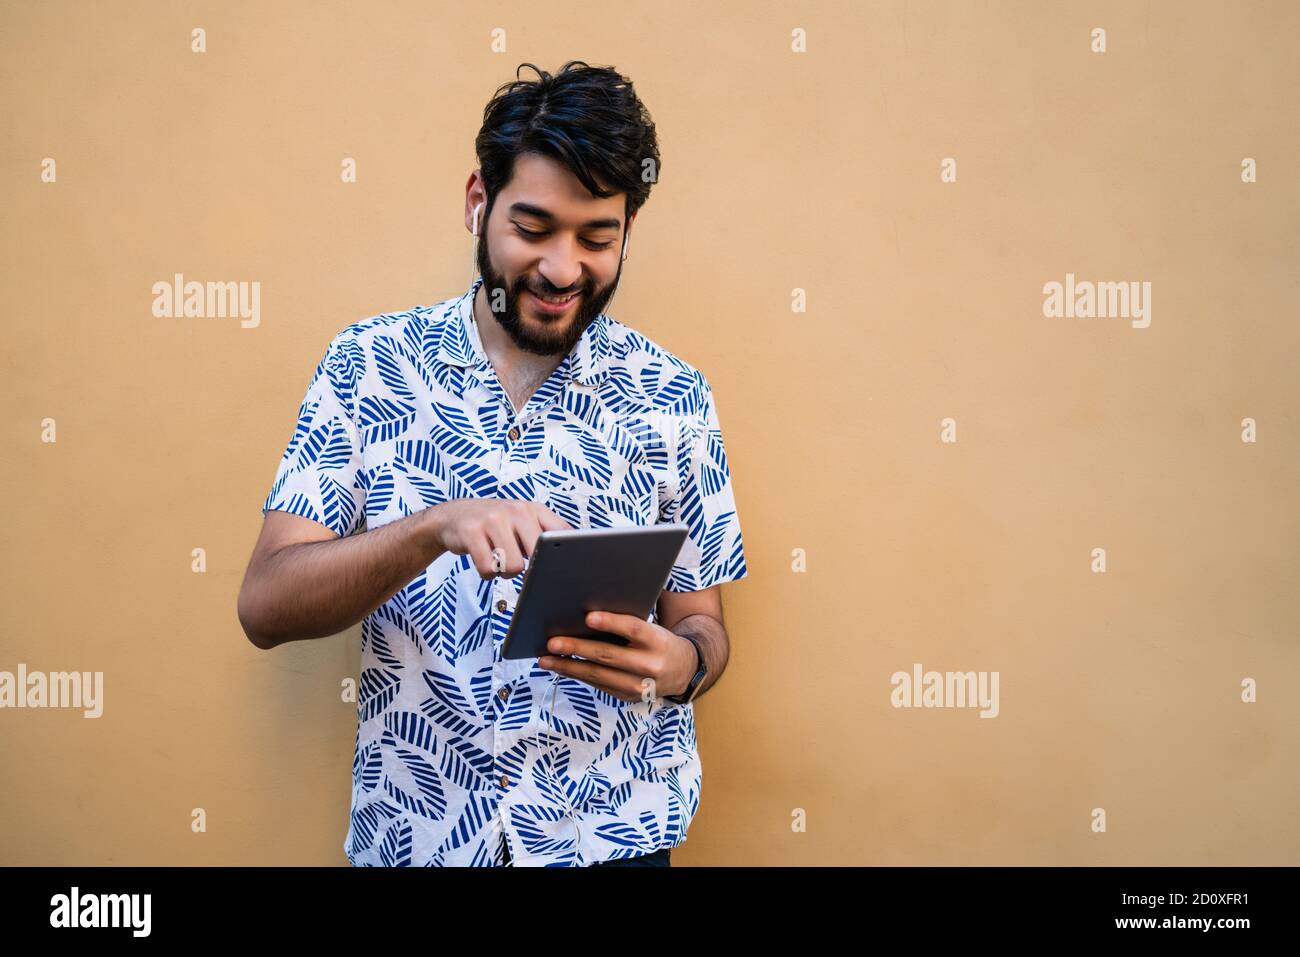 Portrait of young latin man using his digital tablet with earphones against yellow wall. Technology and urban concept. Stock Photo